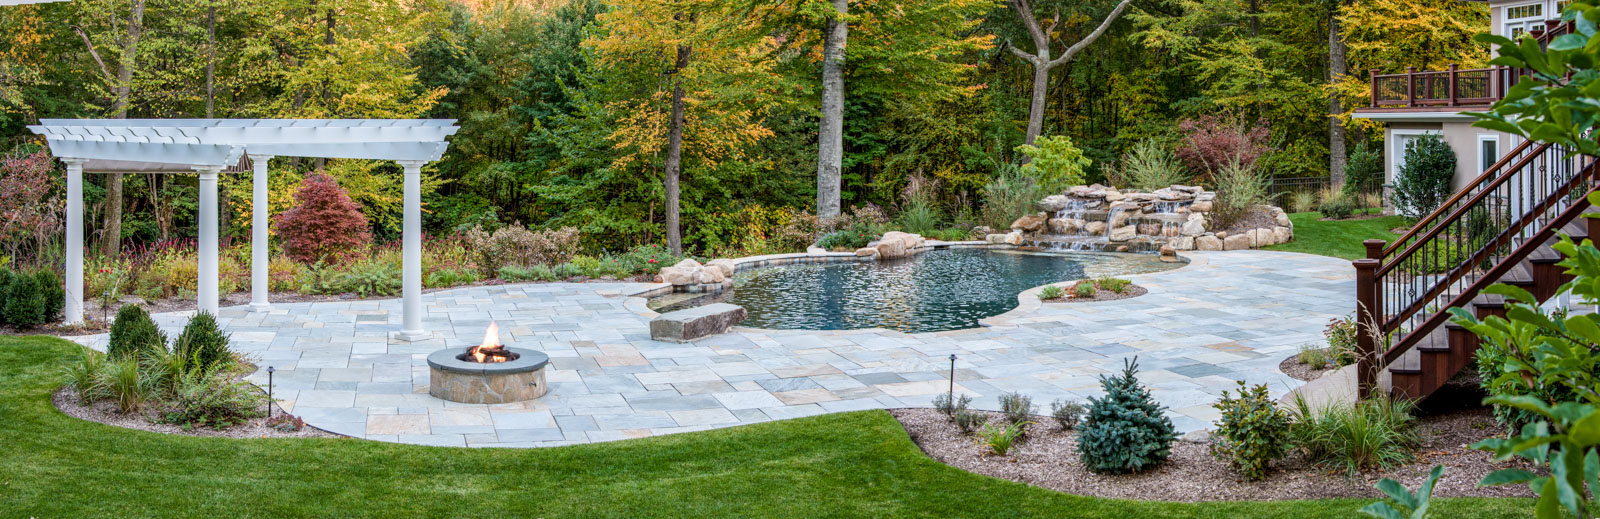 mountain lakes landscape design with custom pool, pergola, fire pit, and pool waterfall